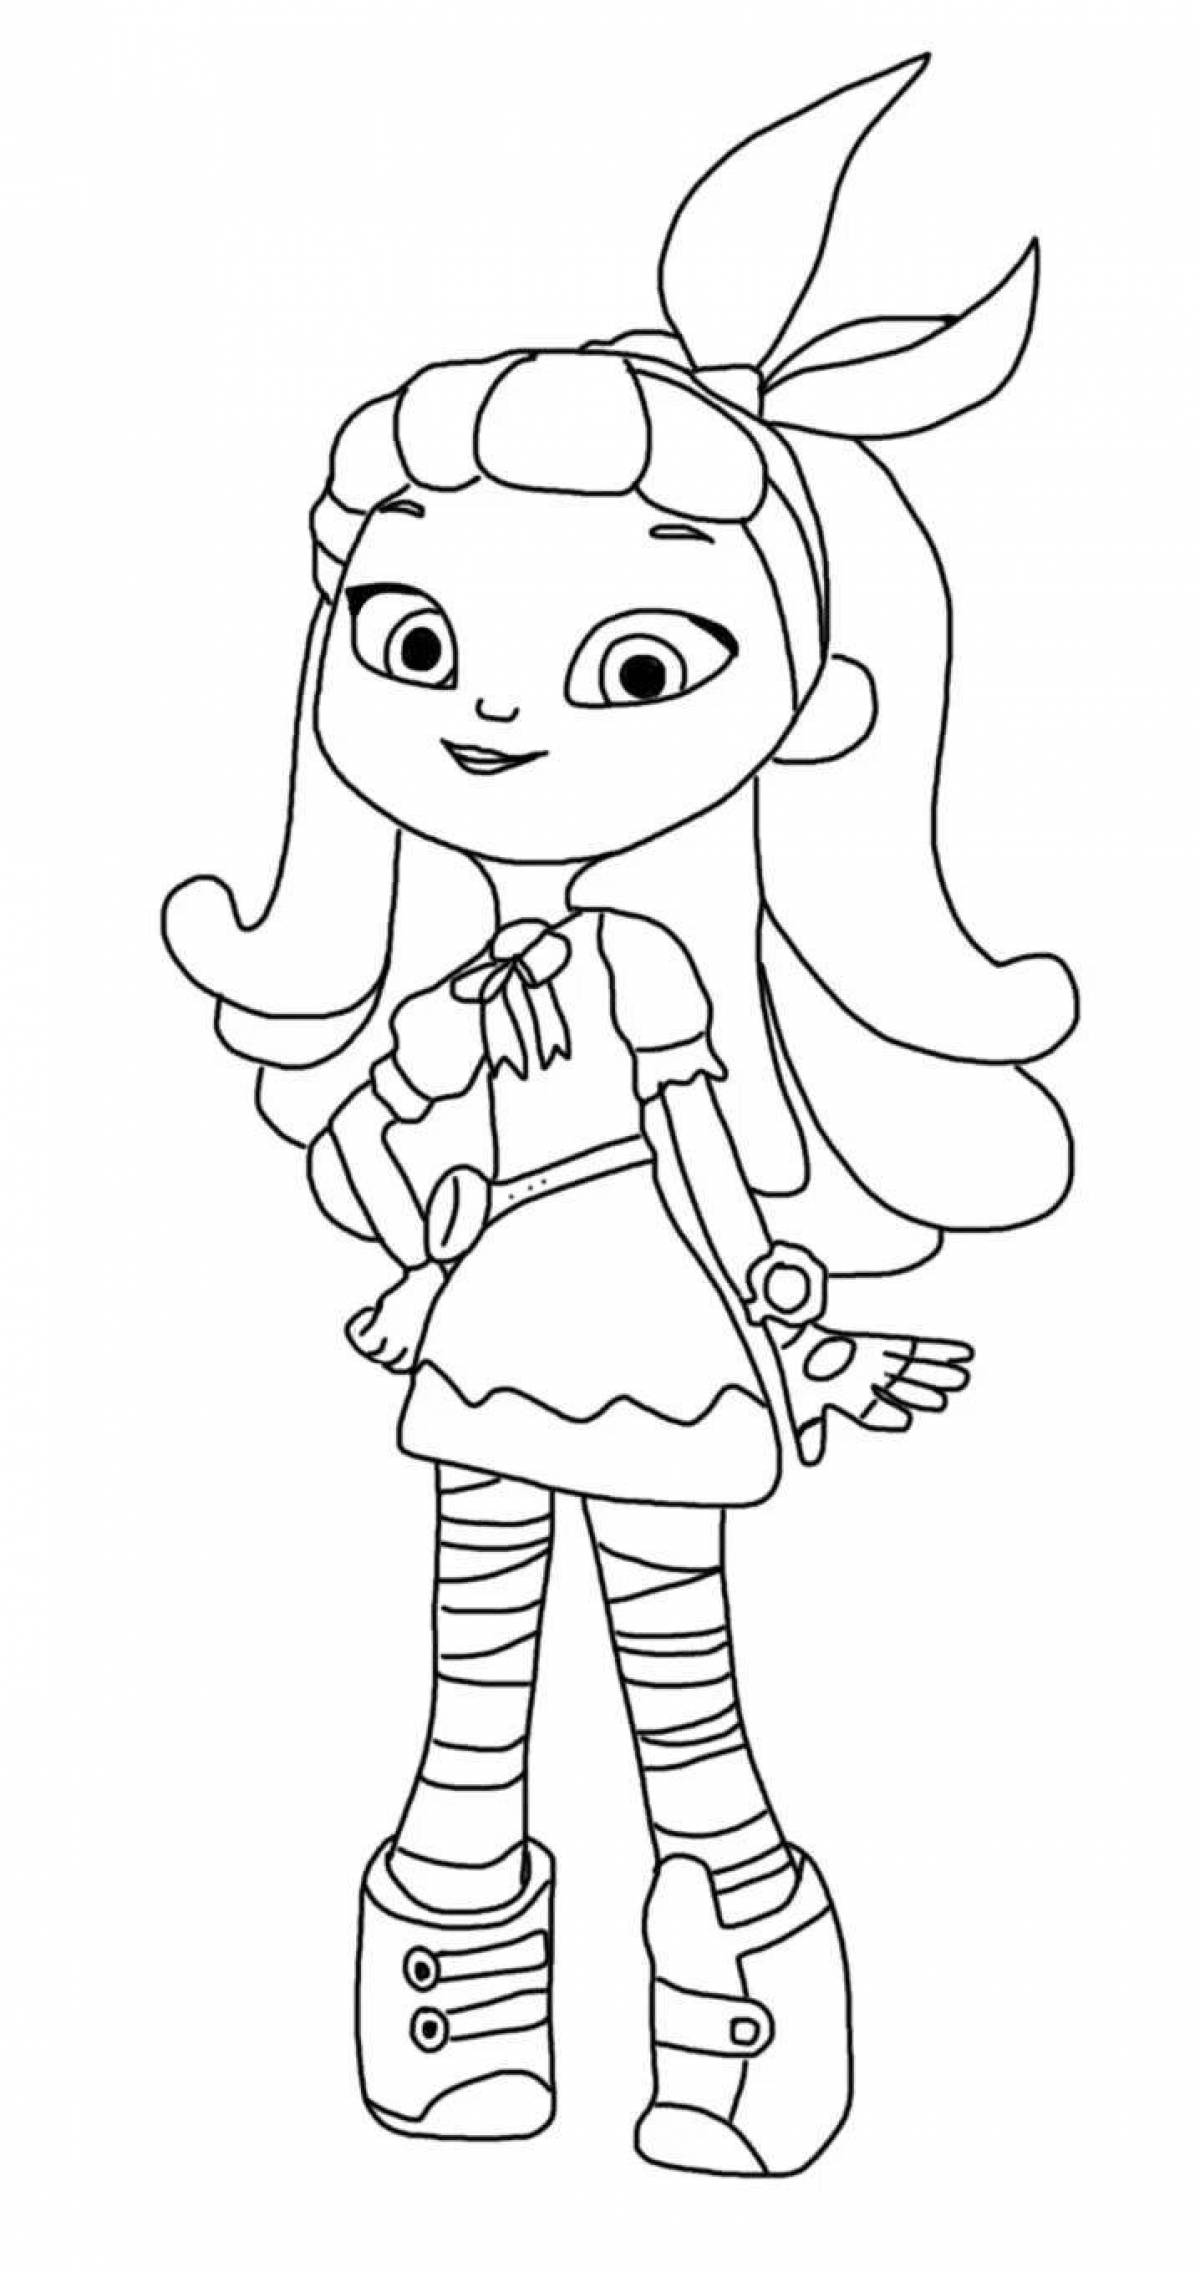 Shiny patrol coloring page for 6-7 year olds